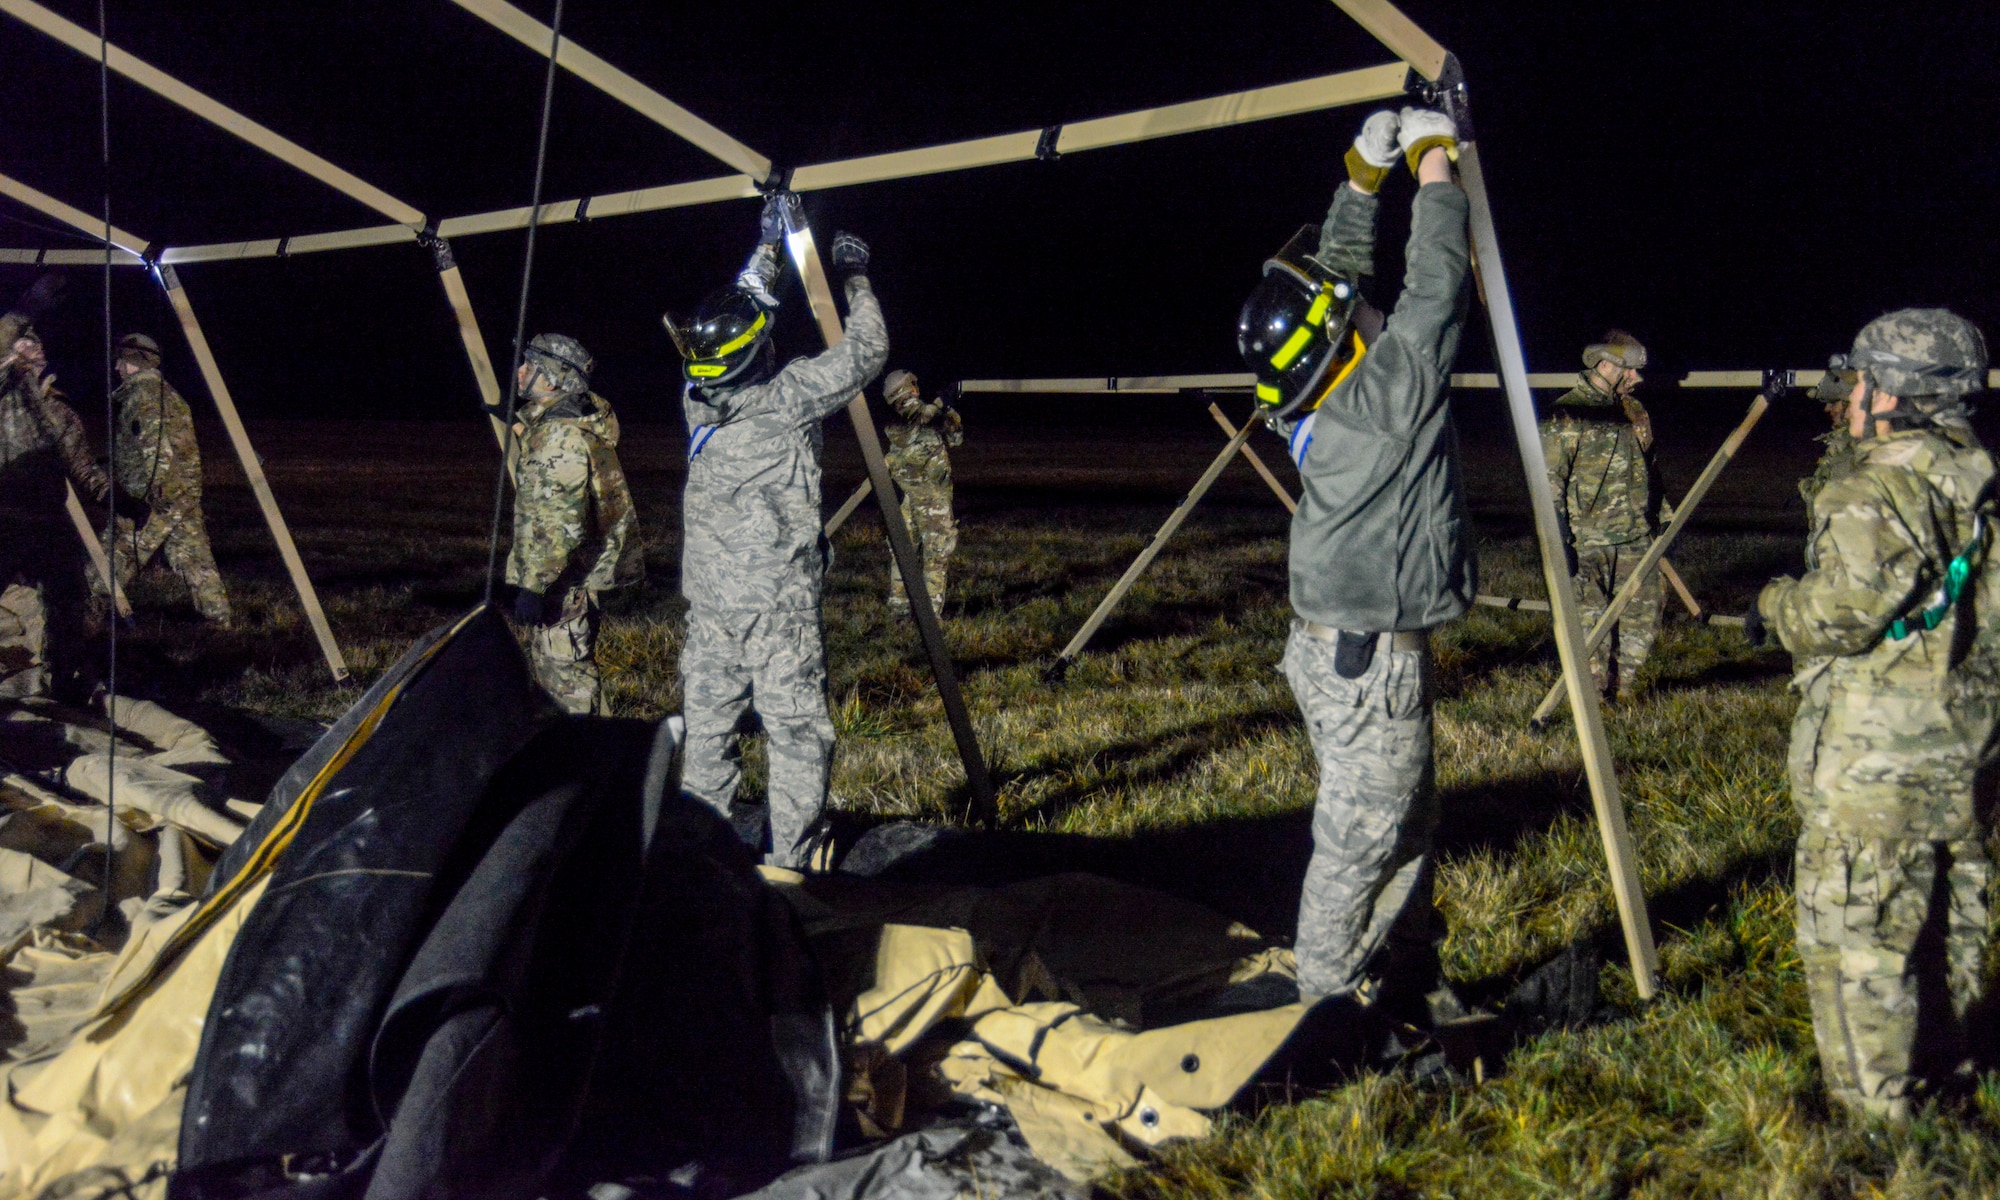 U.S. Airmen assigned to the 435th Contingency Response Group, 435th Air Ground Operations Wing, Ramstein Air Base, Germany, and other organizations build a Tent Model 60 during exercise Contested Forge on Grostenquin Air Base, France, Dec. 3, 2018. As part of Contested Forge, Airmen assigned to the 435th CRG practiced their capability to set up, conduct, and defend austere airfield operations and a bare base. (U.S. Air Force photo by Staff Sgt. Timothy Moore)